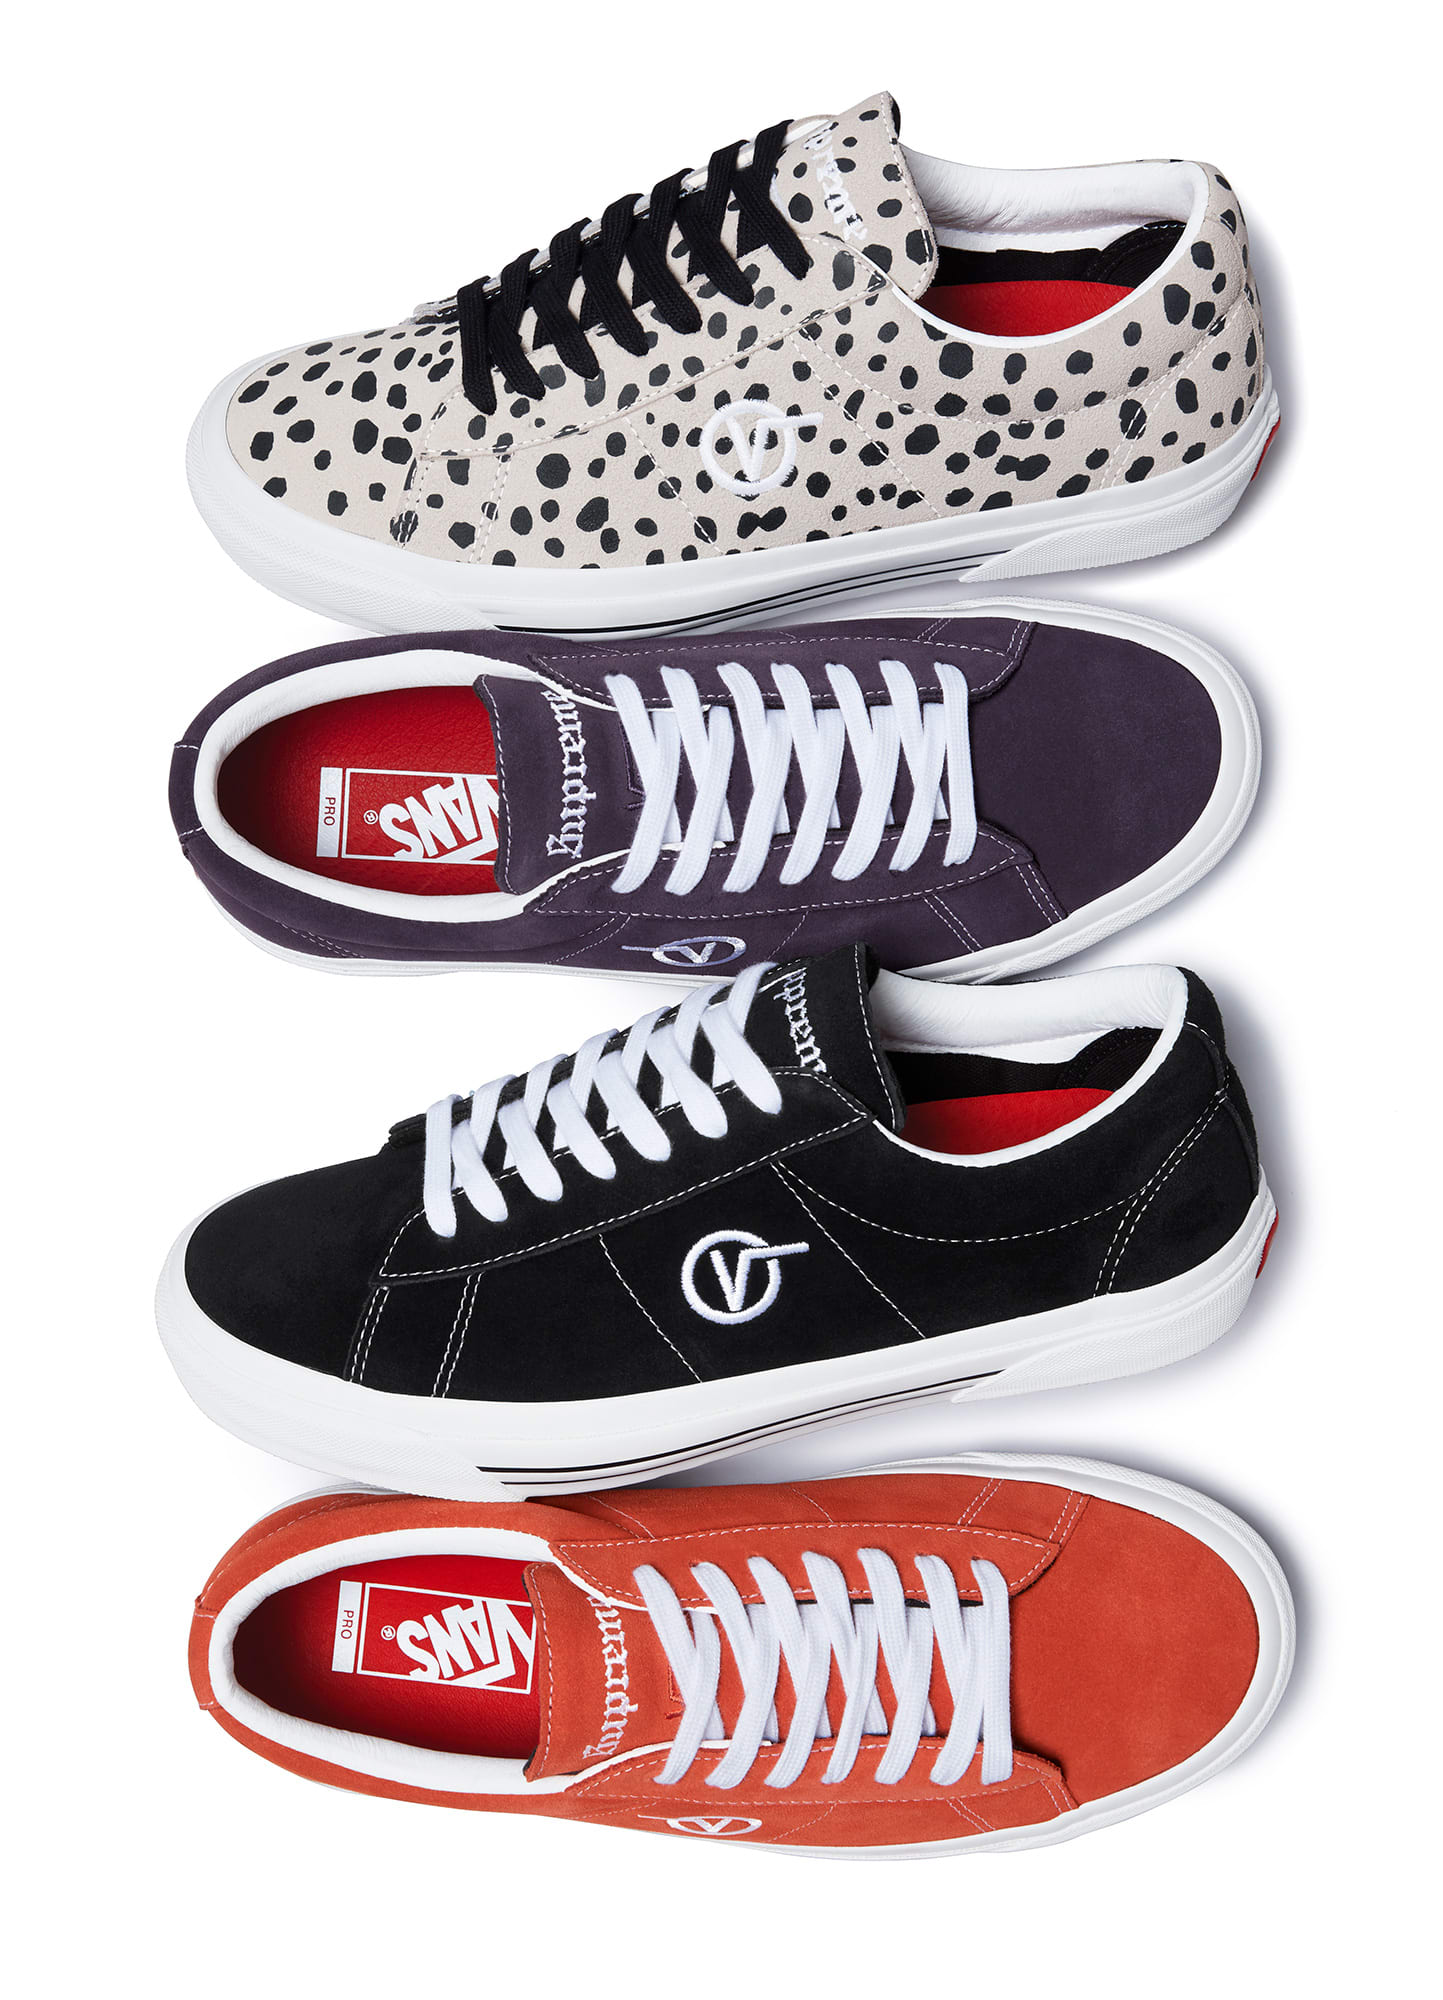 Supreme x Vans Sid Pro Collection Release Date | Sole Collector